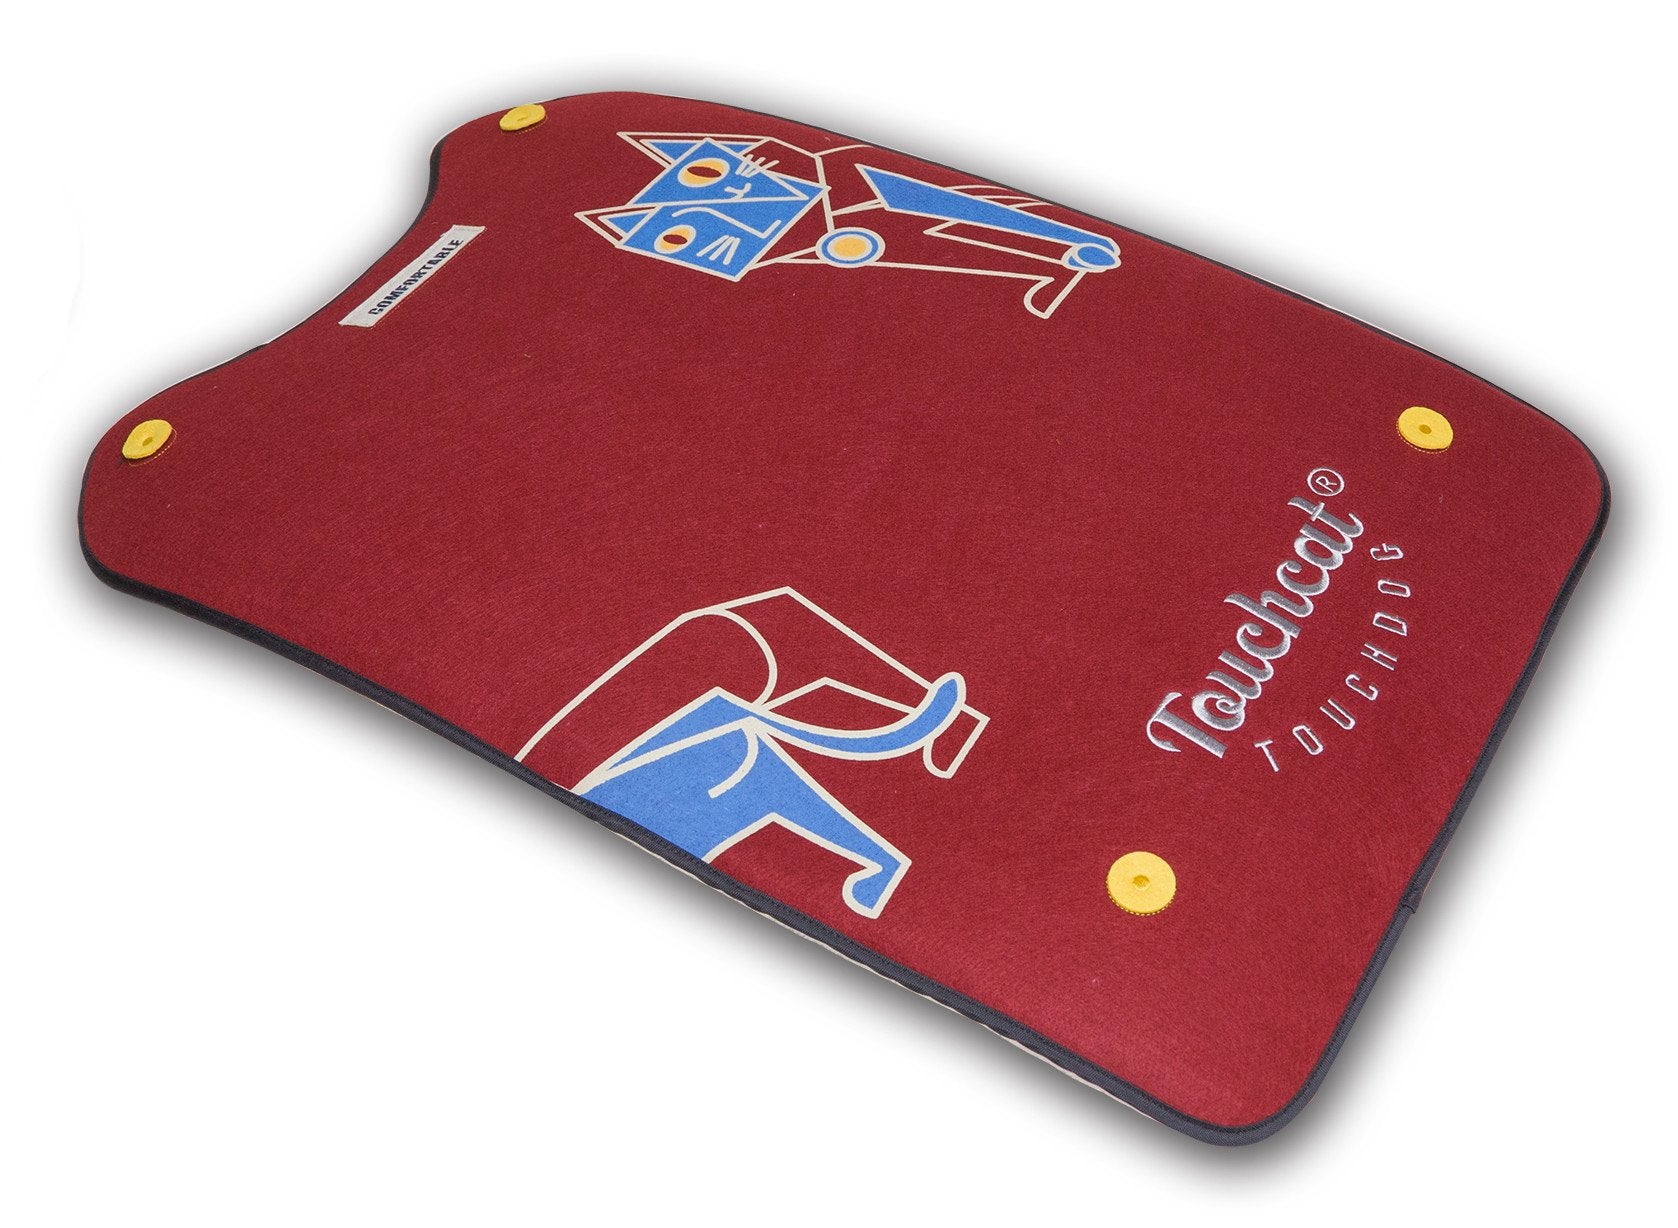 Touchcat Lamaste Travel Embroidered Pet Bed Mat - Red - Small